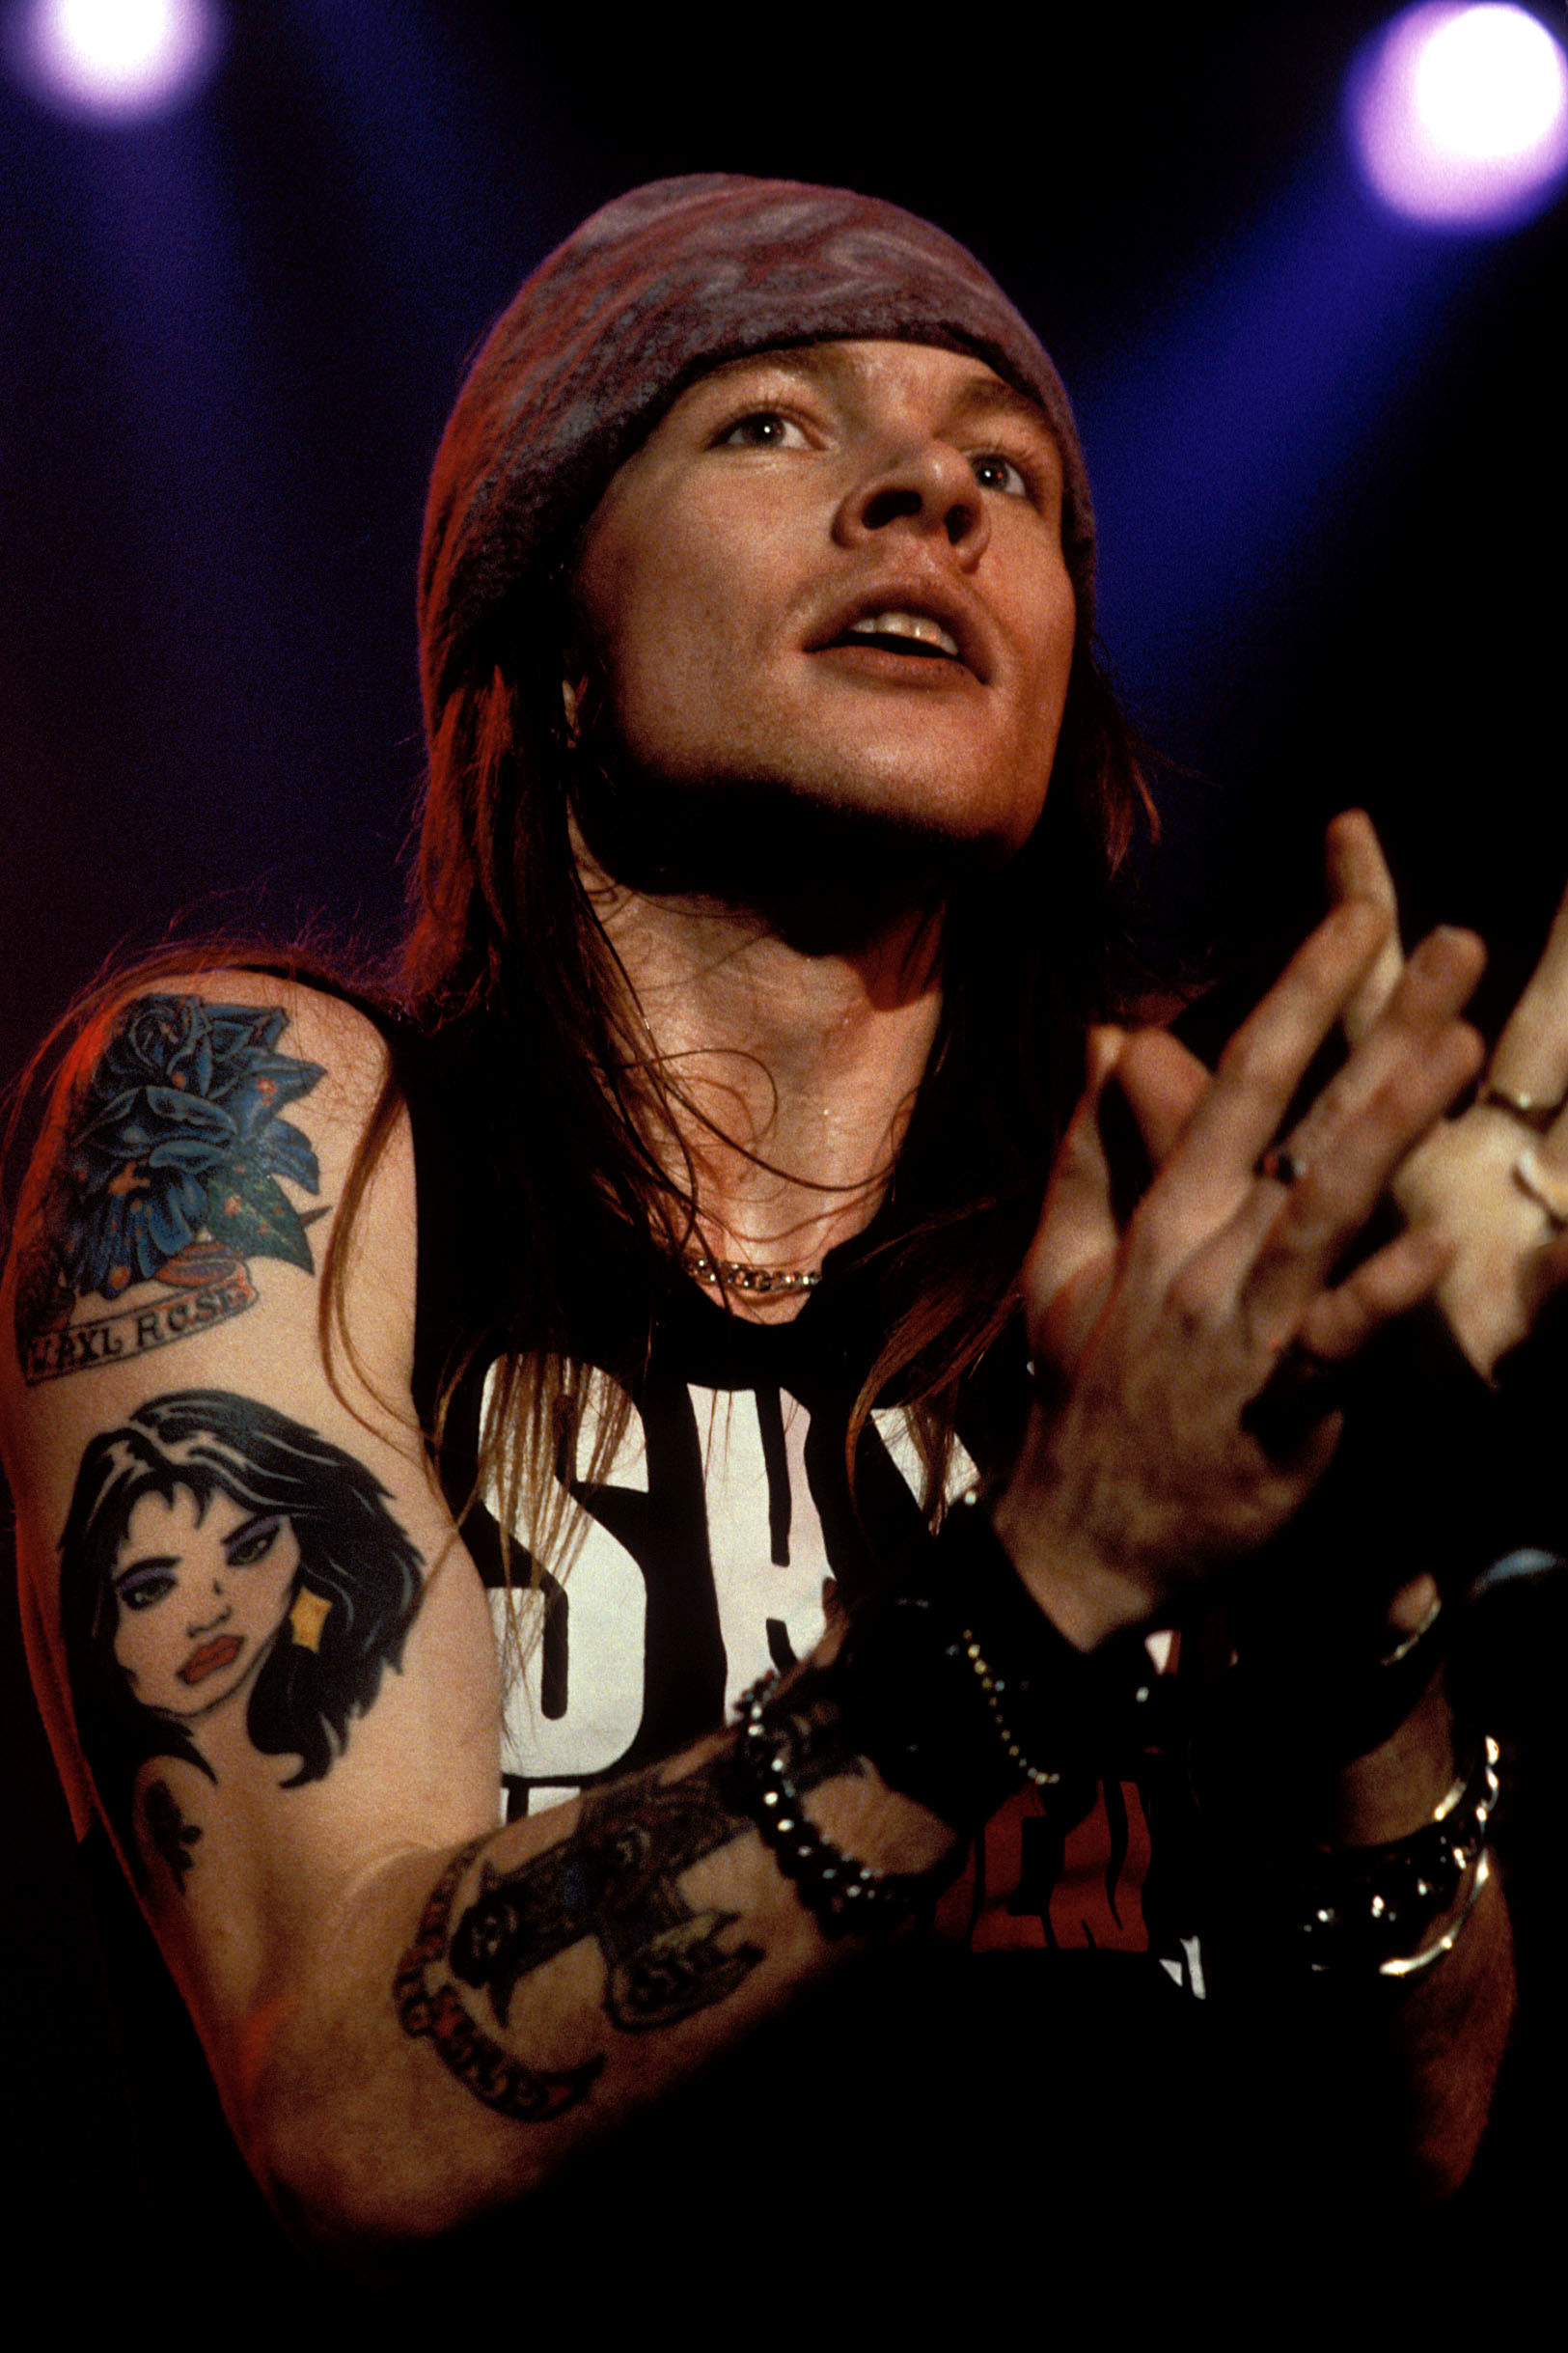 Axl Rose Guns N Roses frontman Axl Rose looks unrecognisable as he